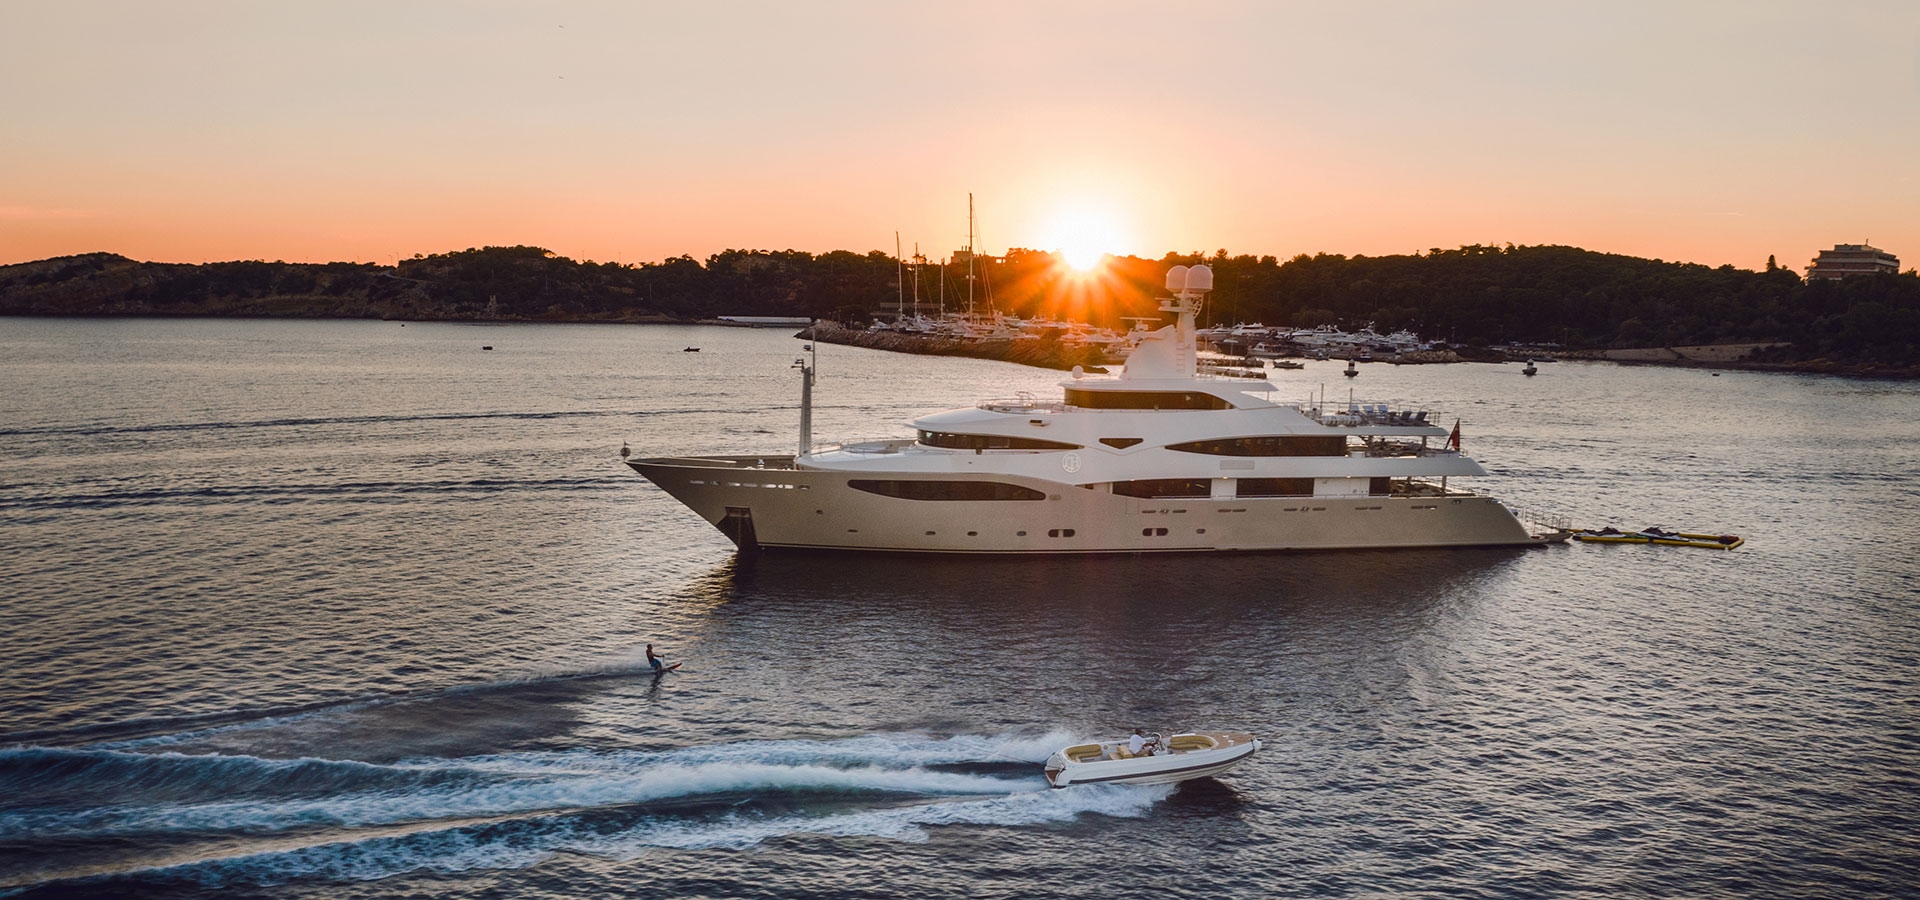 Leaders in the world of yachting